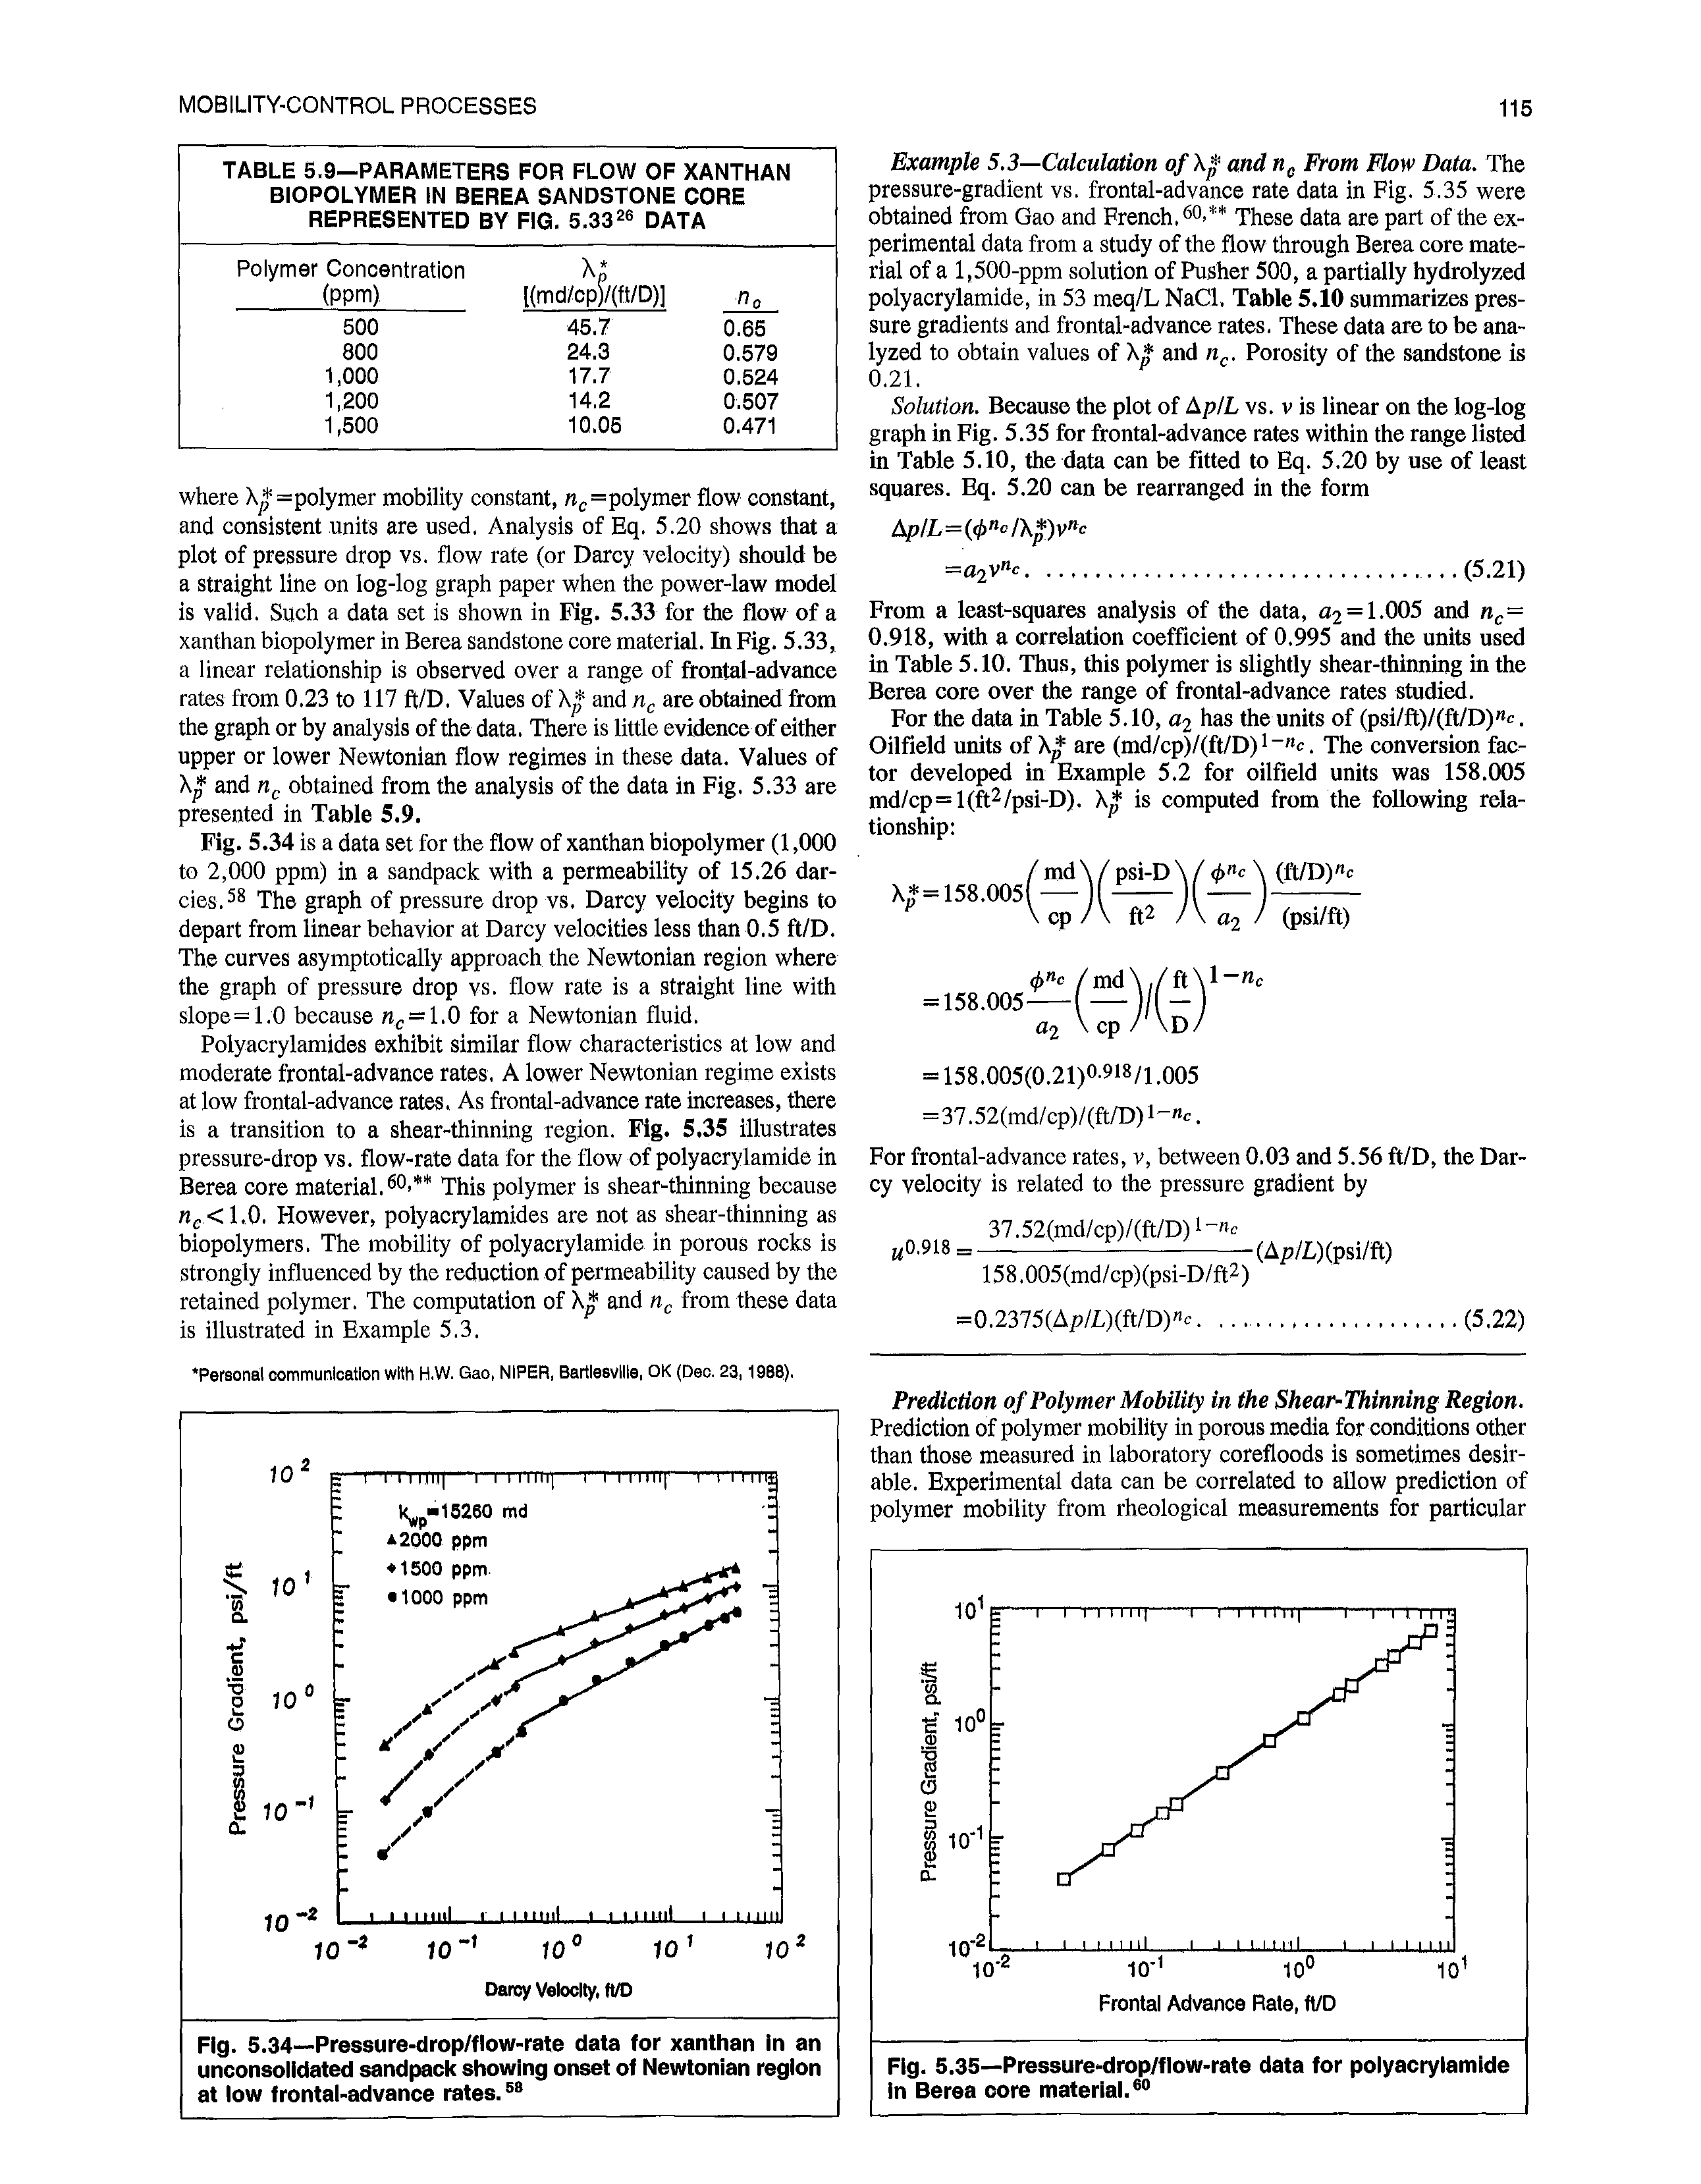 Fig. 5.34—Pressure-drop/flow-rate data for xanthan In an unconsolidated sandpack showing onset of Newtonian region at low frontal-advance rates.